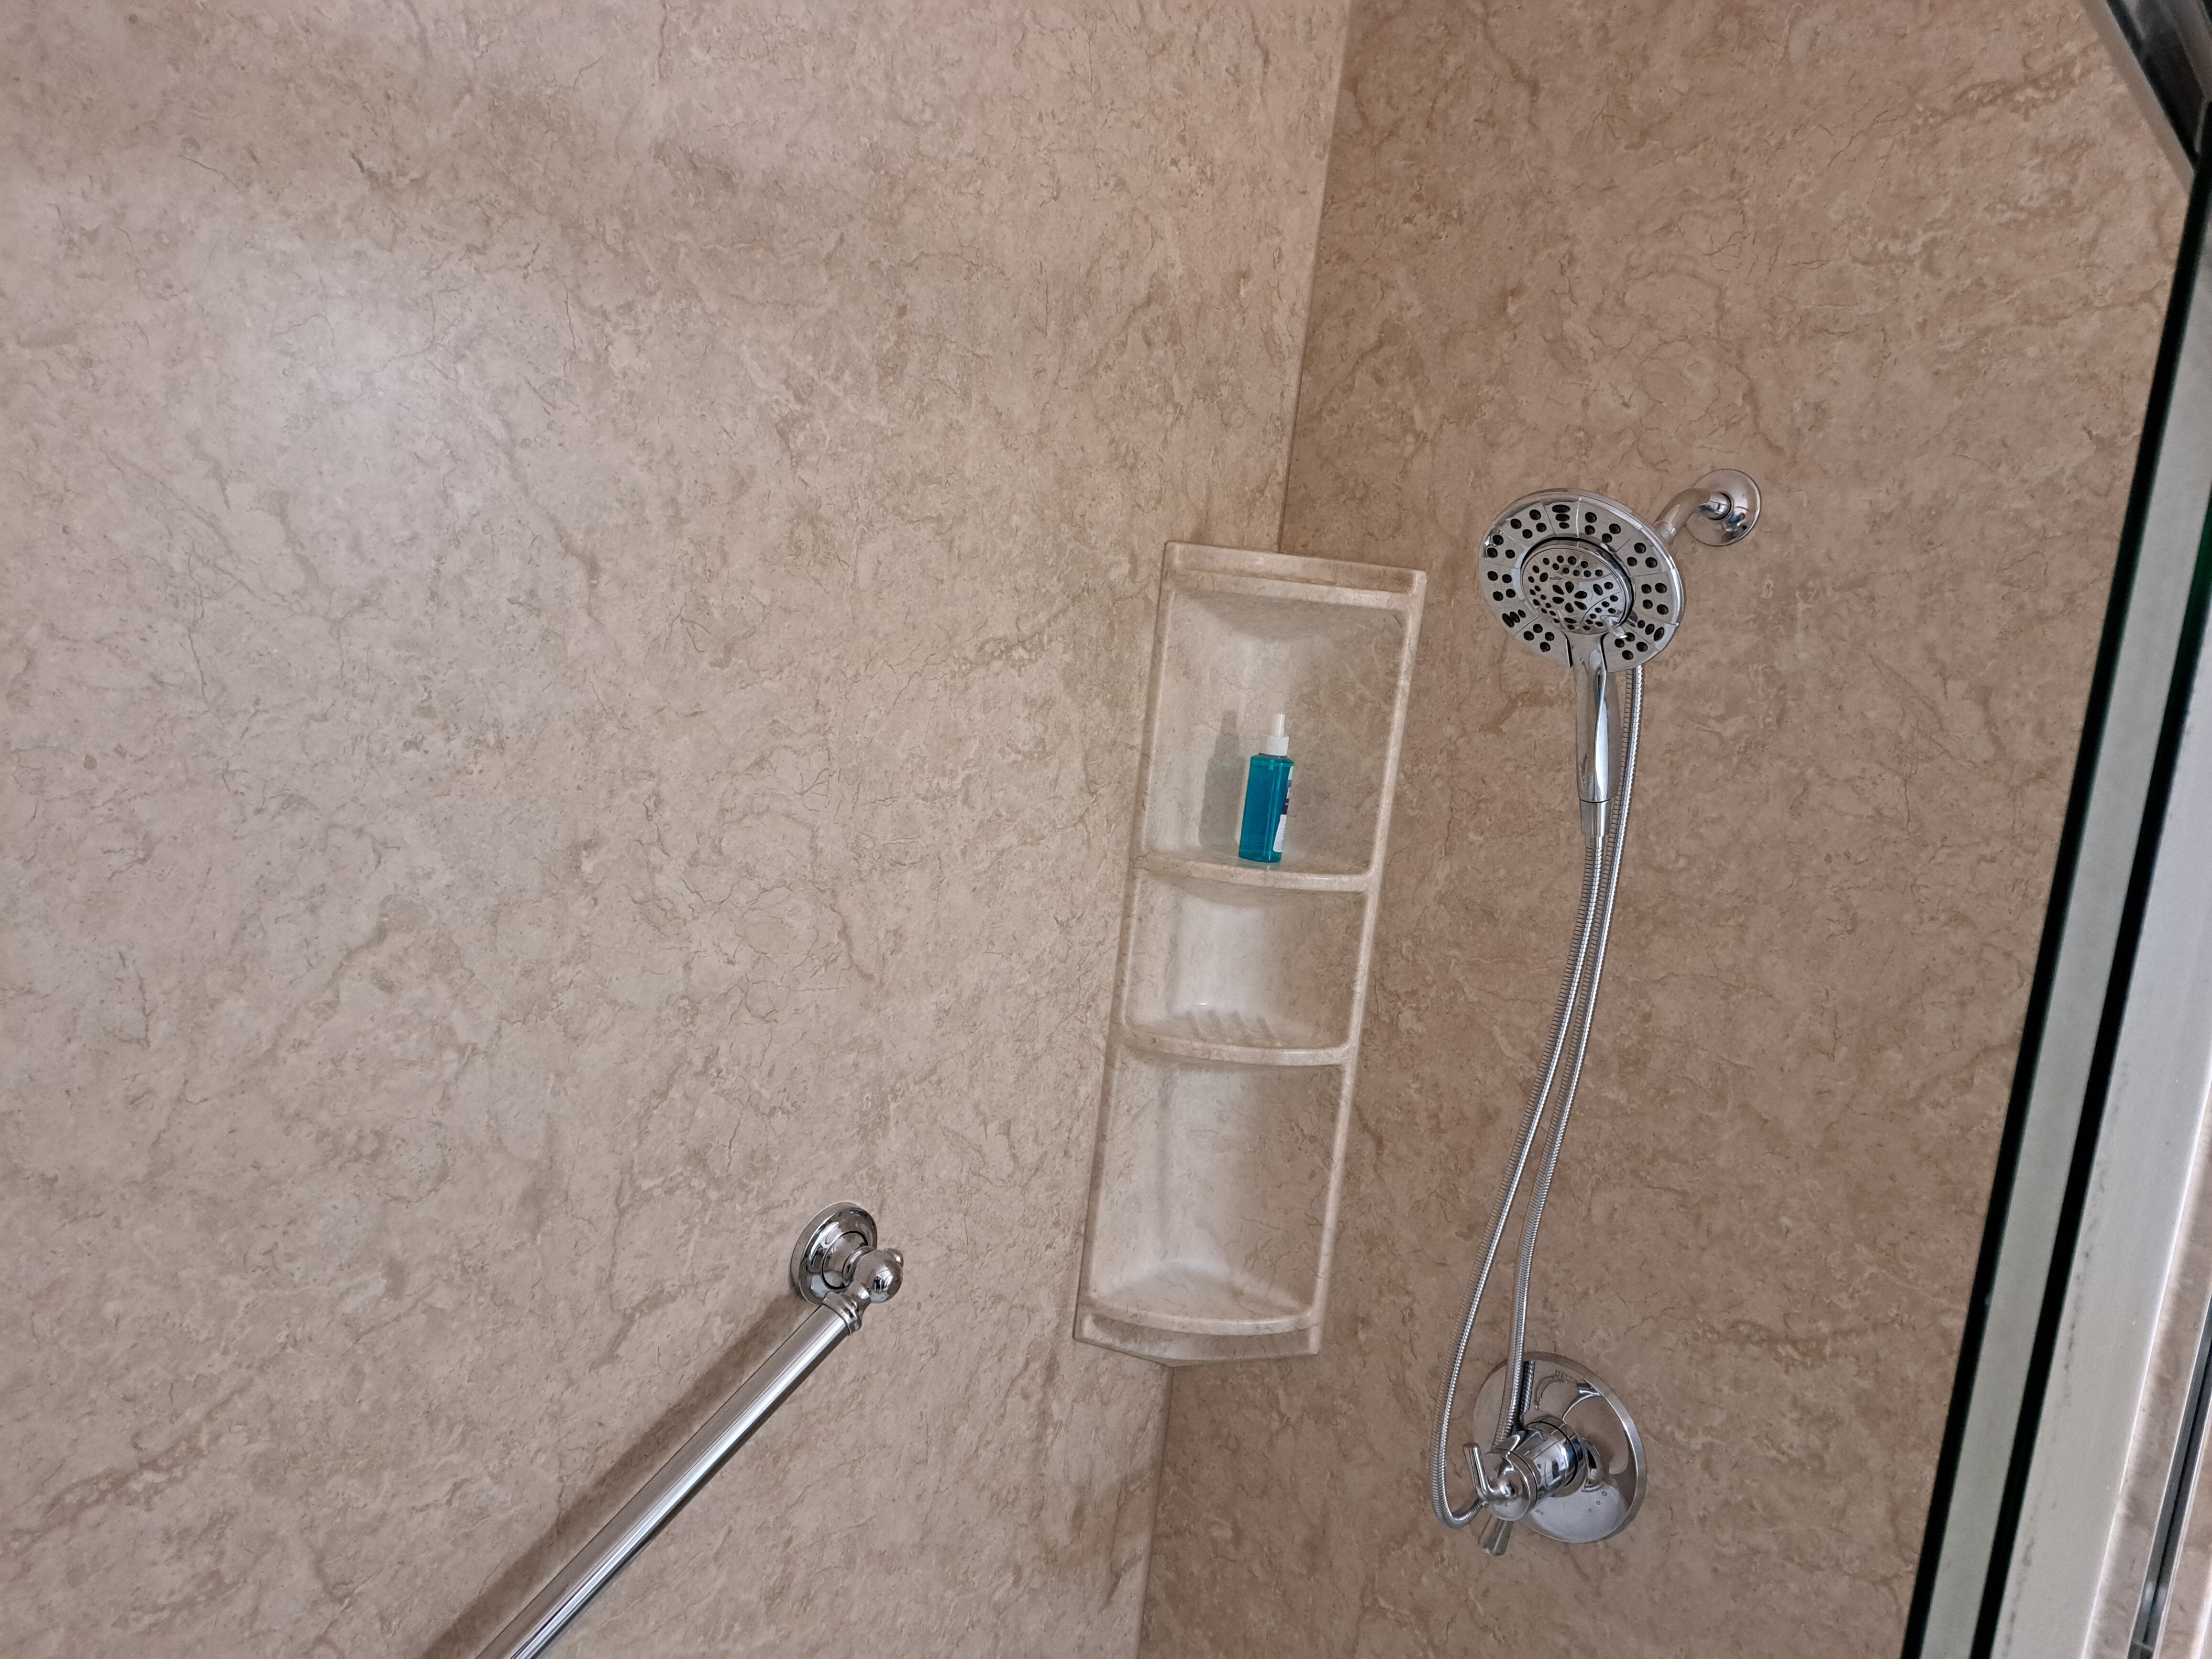 New shower head and shelving